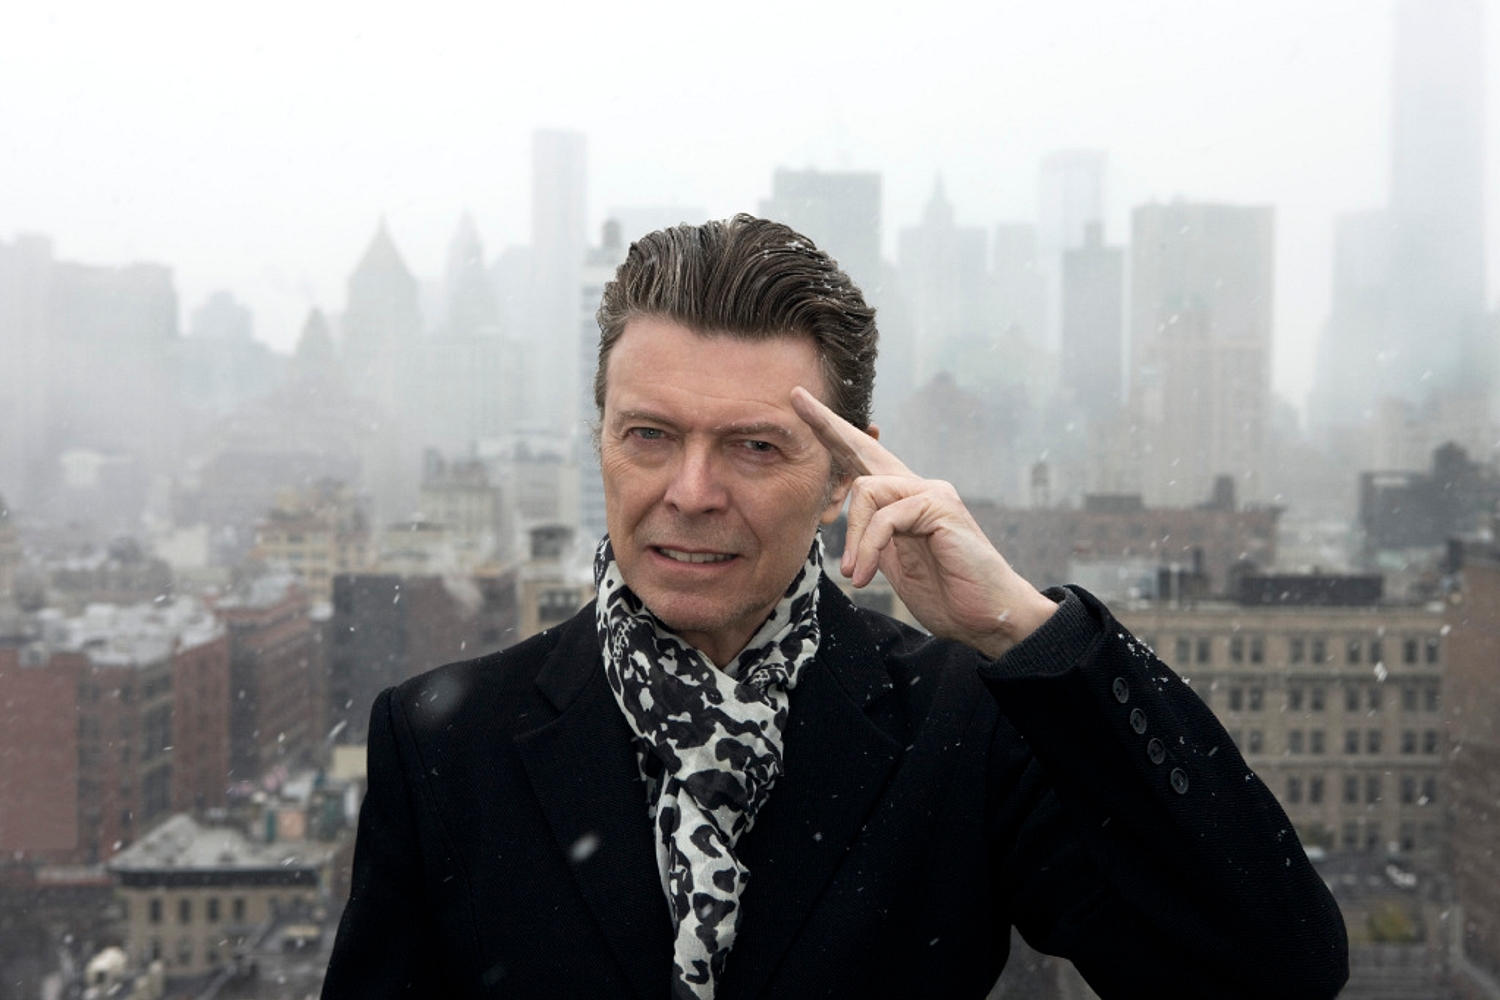 David Bowie’s ‘No Plan’ EP released to mark his 70th birthday